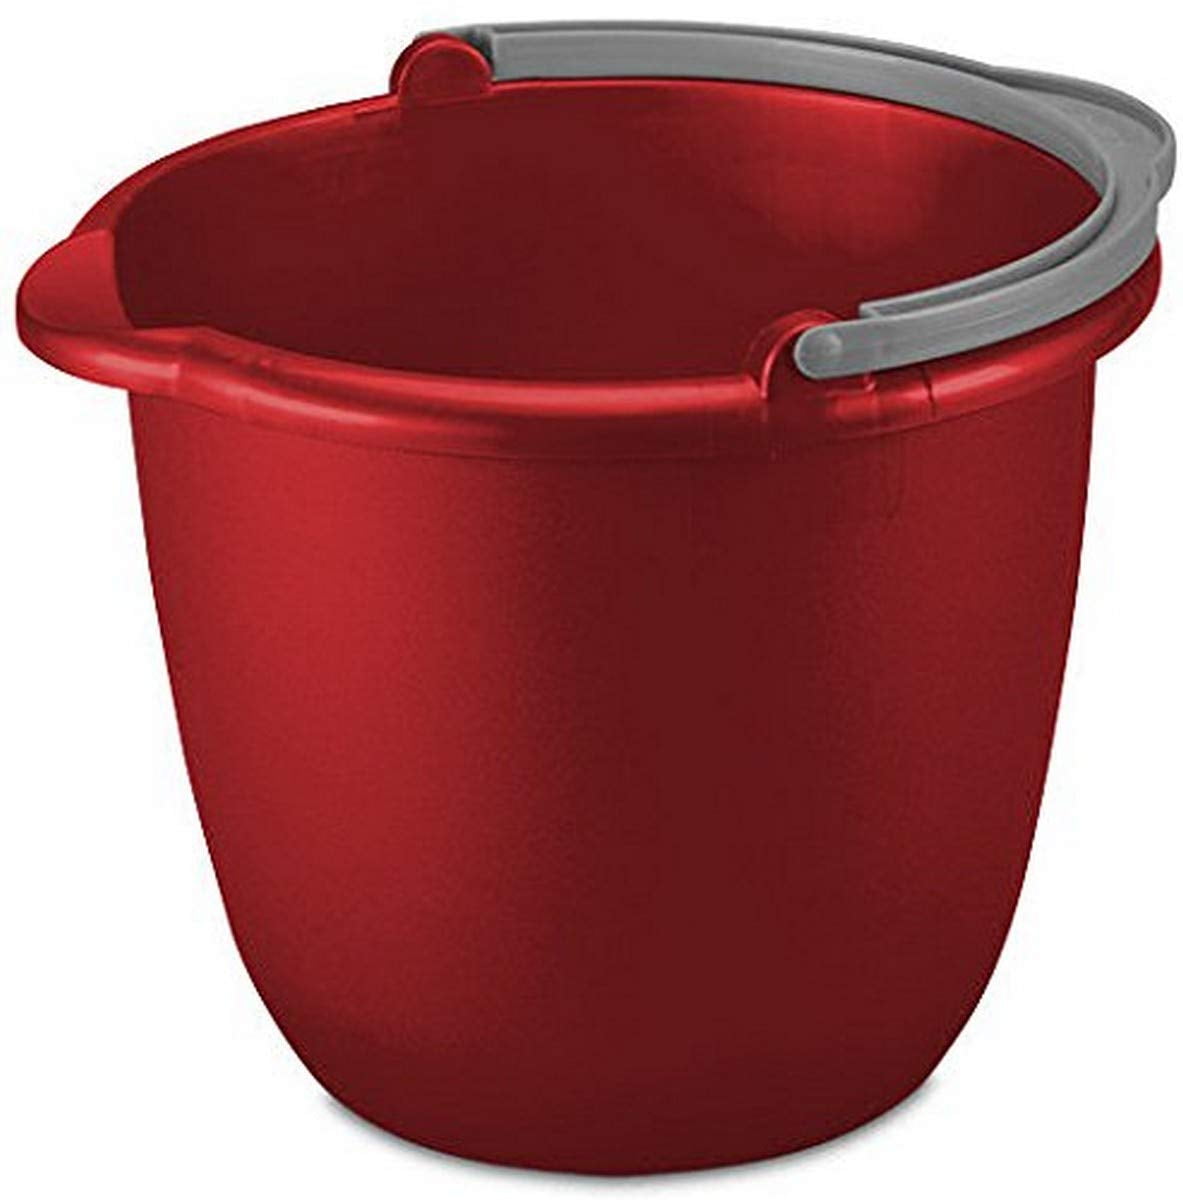 Kraft Tool GG468-02 Lid with Spout for 5 Gallon Plastic Bucket